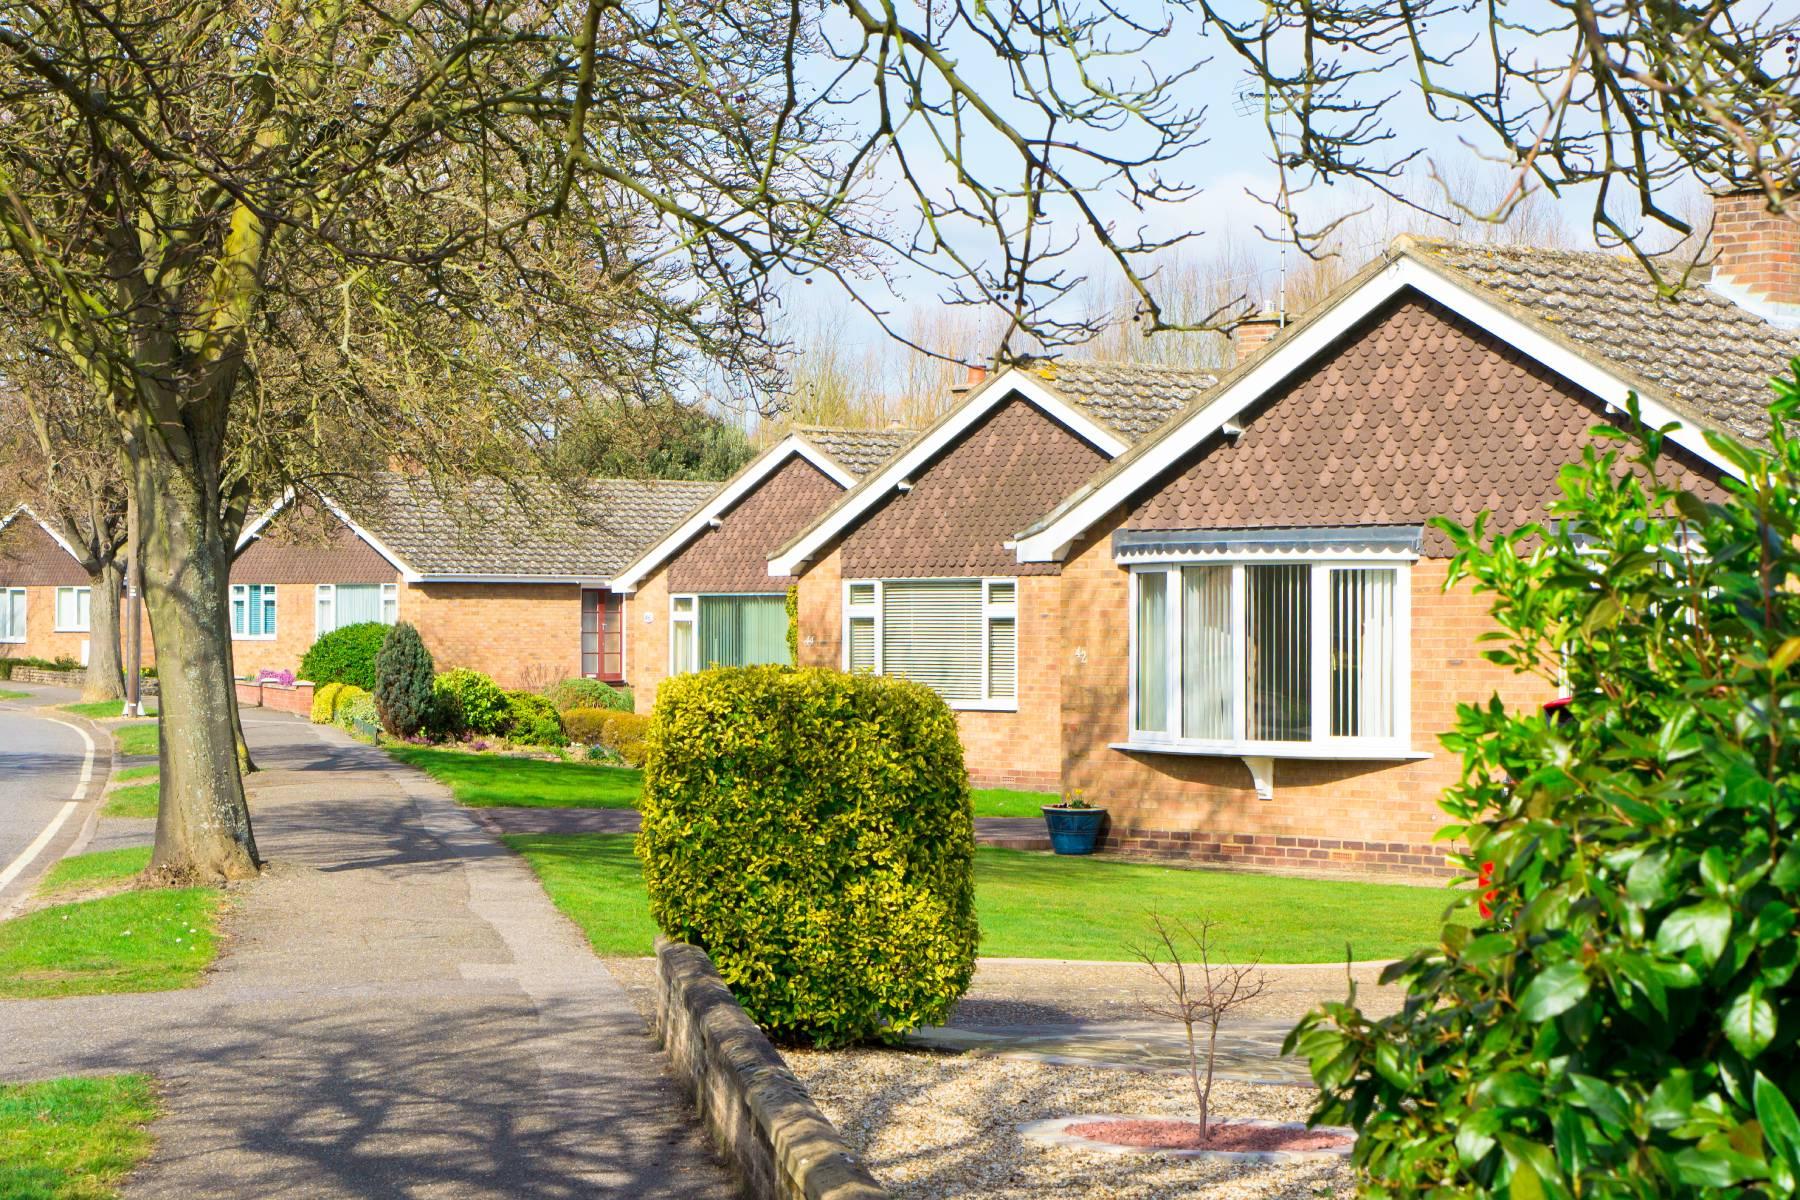 Everything you need to know about when buying a bungalow